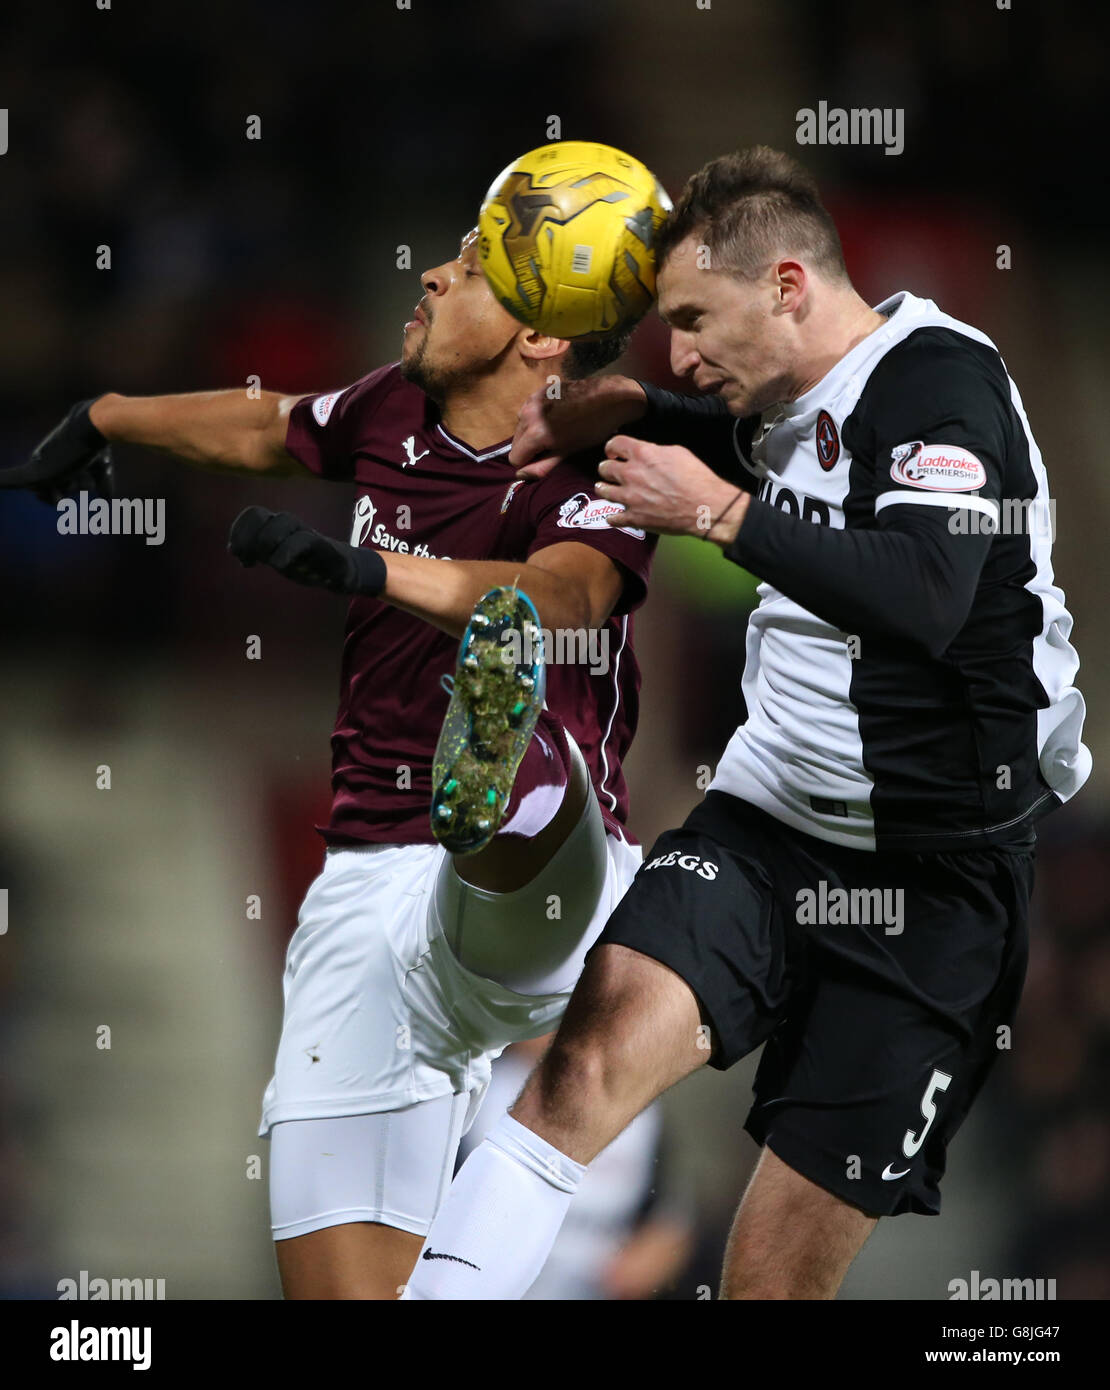 Heart of Midlothian's Osman Sow (left) battles for the ball with Dundee United's Callum Morris during the Ladbrokes Scottish Premiership match at Tynecastle Stadium, Edinburgh. PRESS ASSOCIATION Photo. Picture date: Wednesday December 30, 2015. See PA story SOCCER Hearts. Photo credit should read: Andrew Milligan/PA Wire. Stock Photo